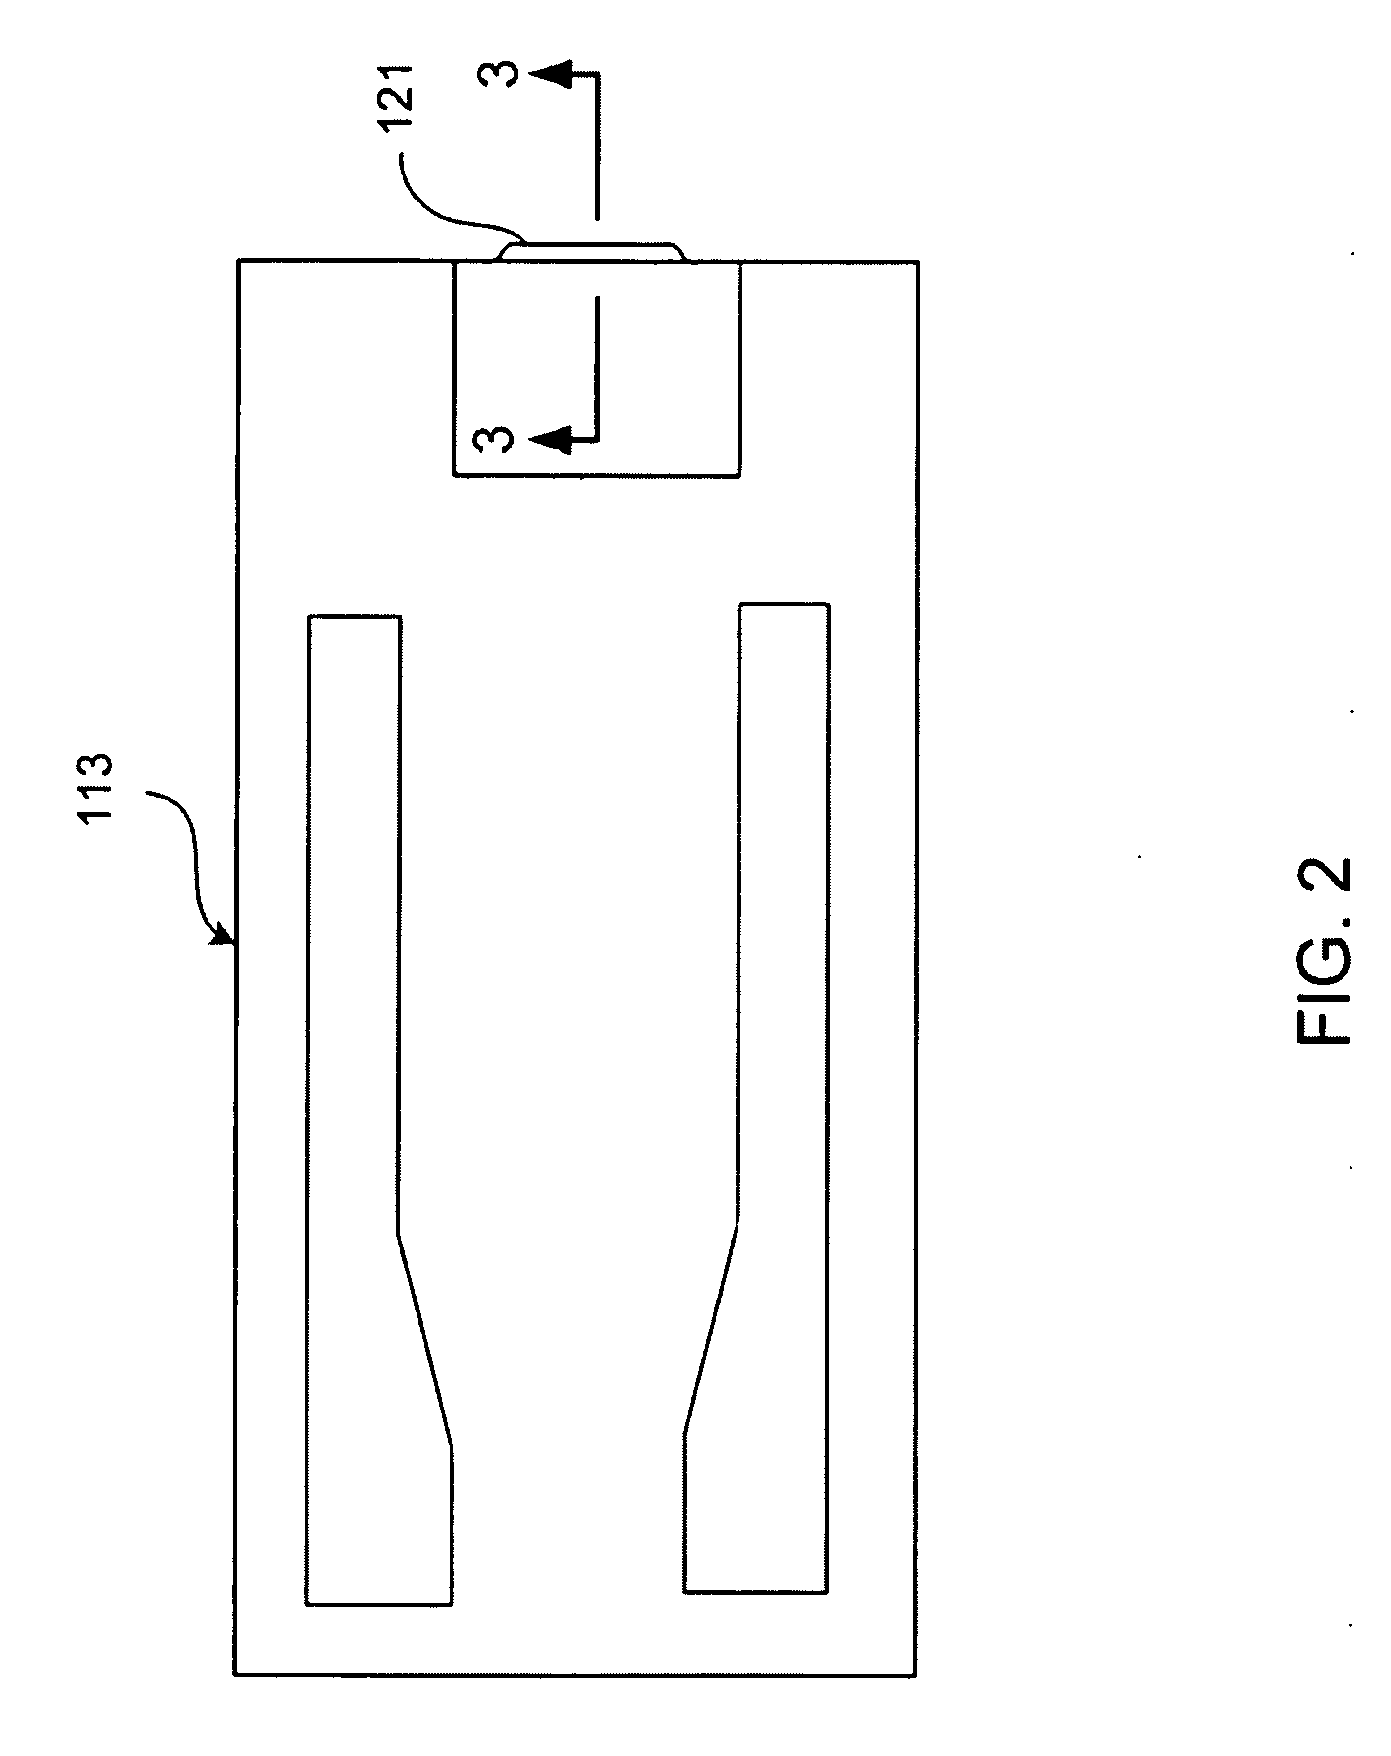 Perpendicular write head having a modified wrap-around shield to improve overwrite, adjacent track interference and magnetic core width dependence on skew angle